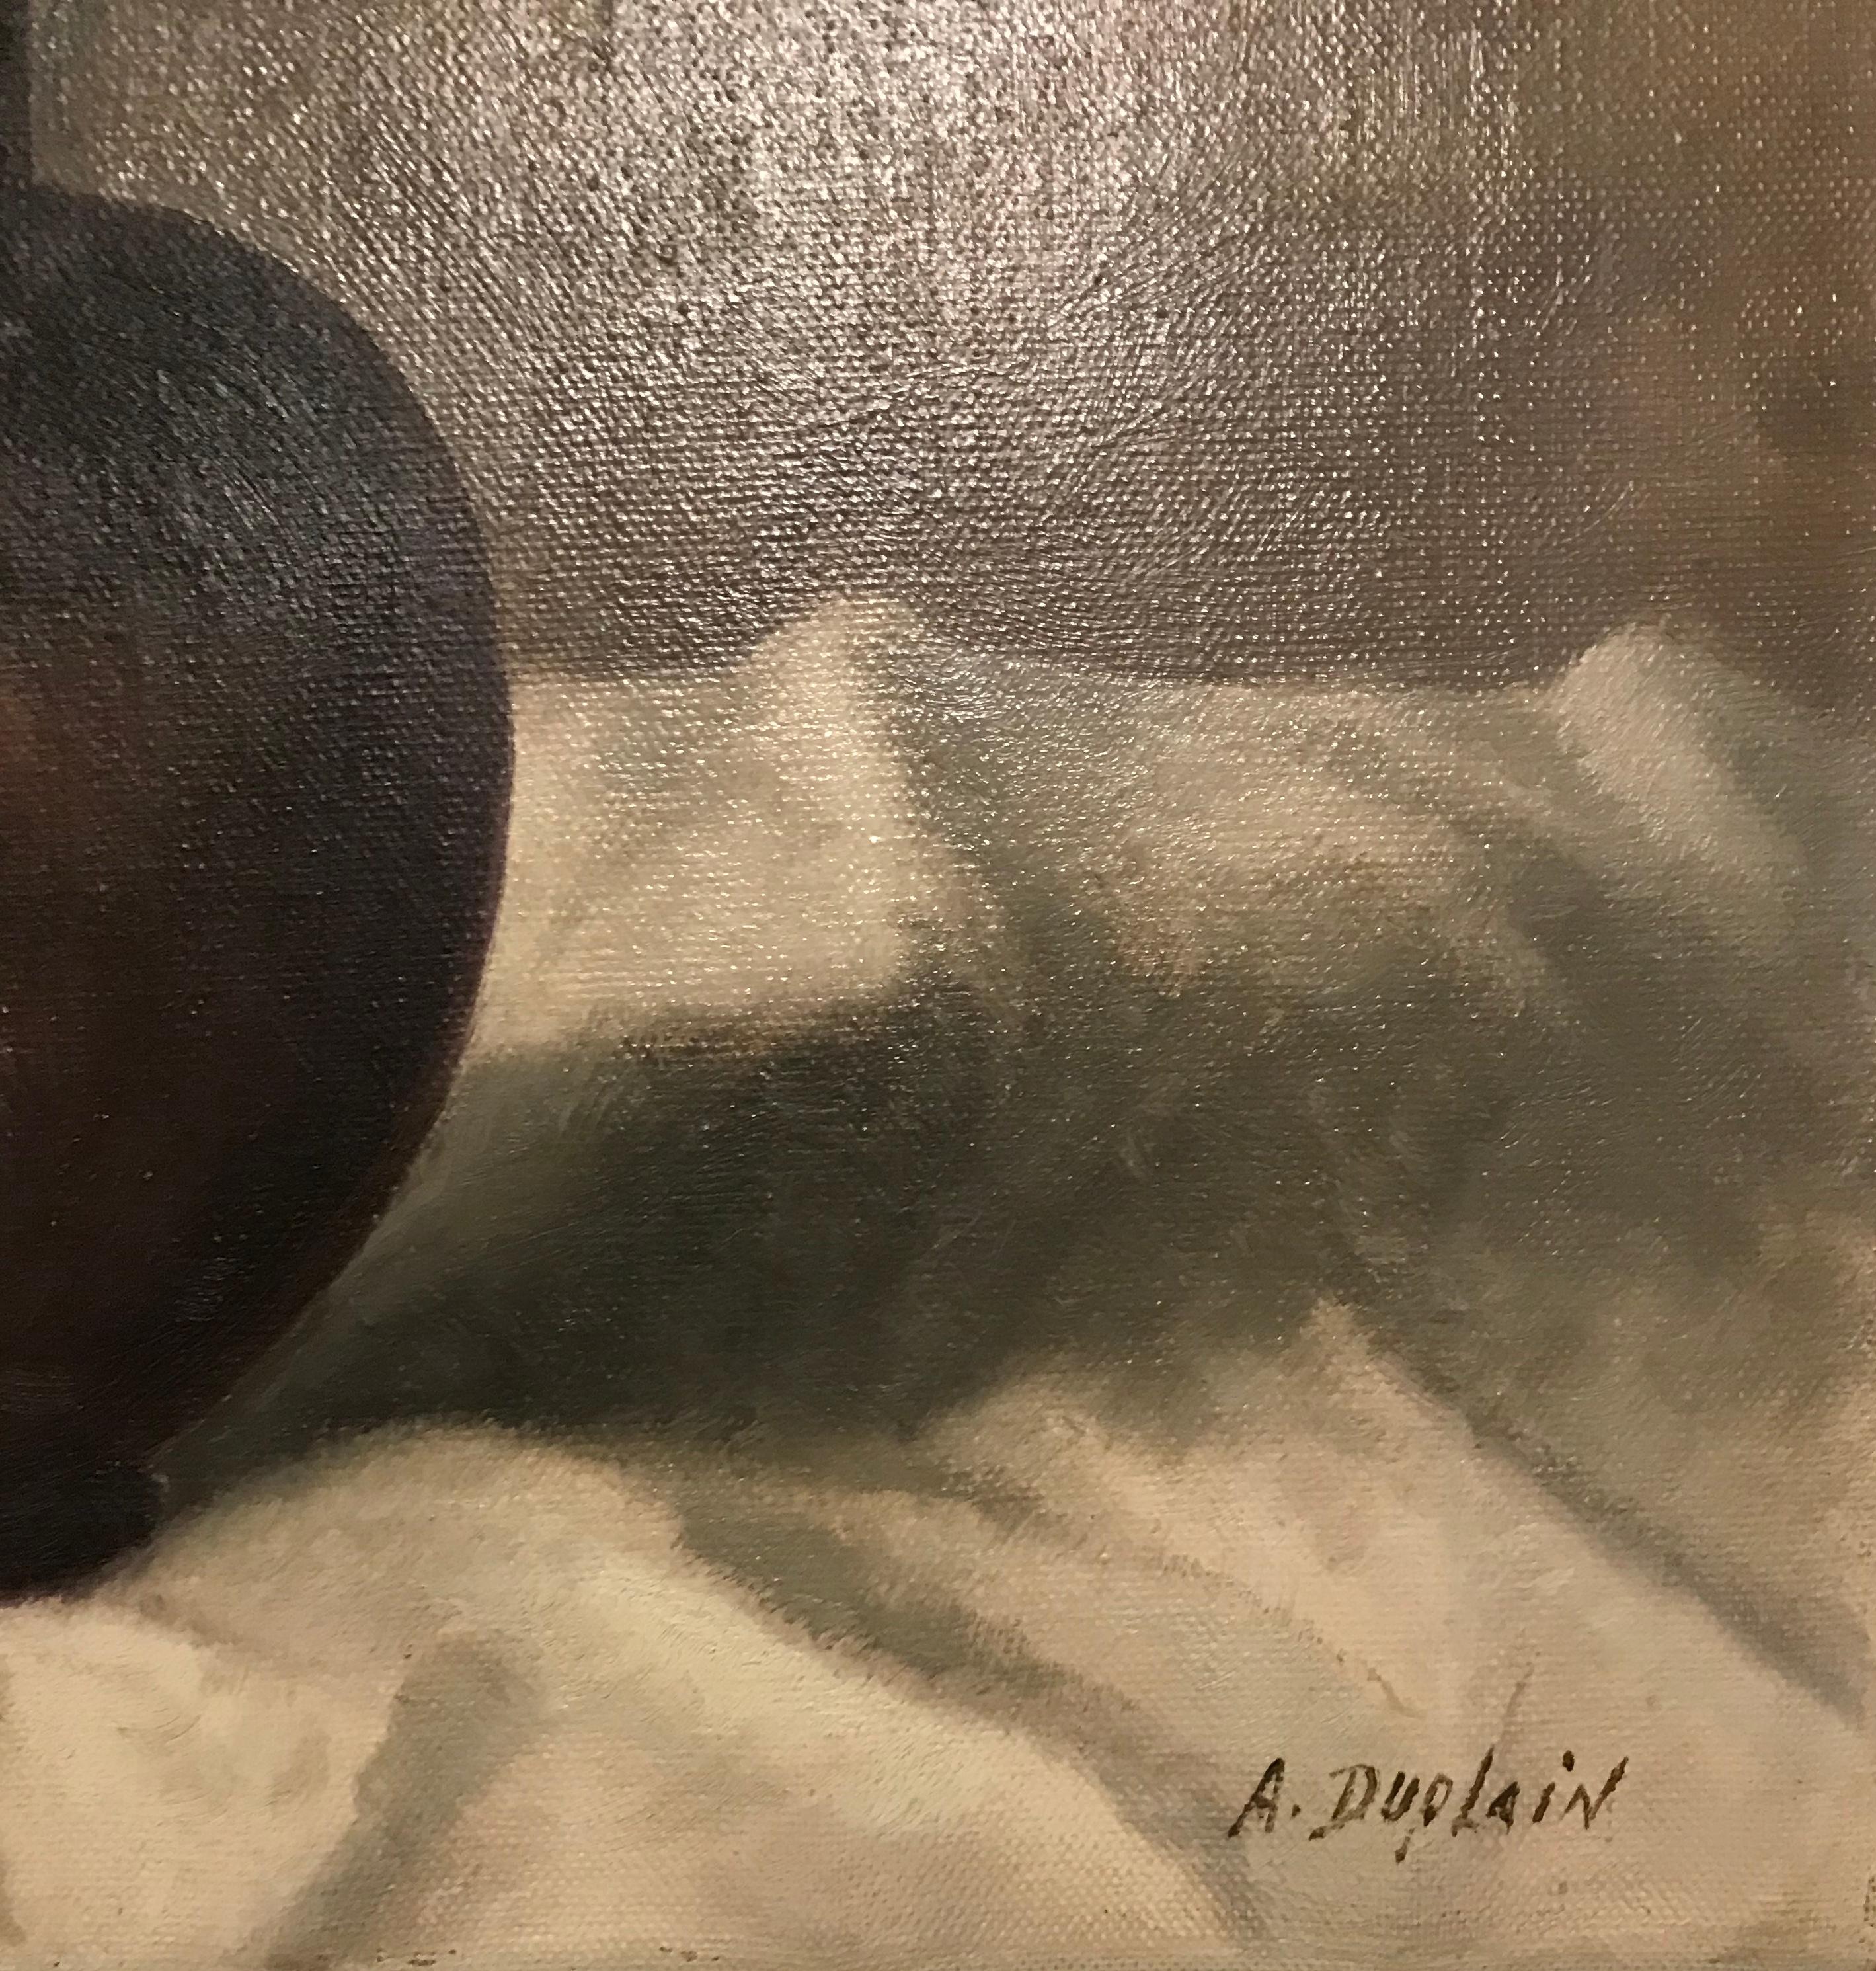 Albert Duplain was a Swiss painter who was born in 1890. Albert Duplain's work has been offered at auction multiple times.
Died in 1978.

Work on canvas